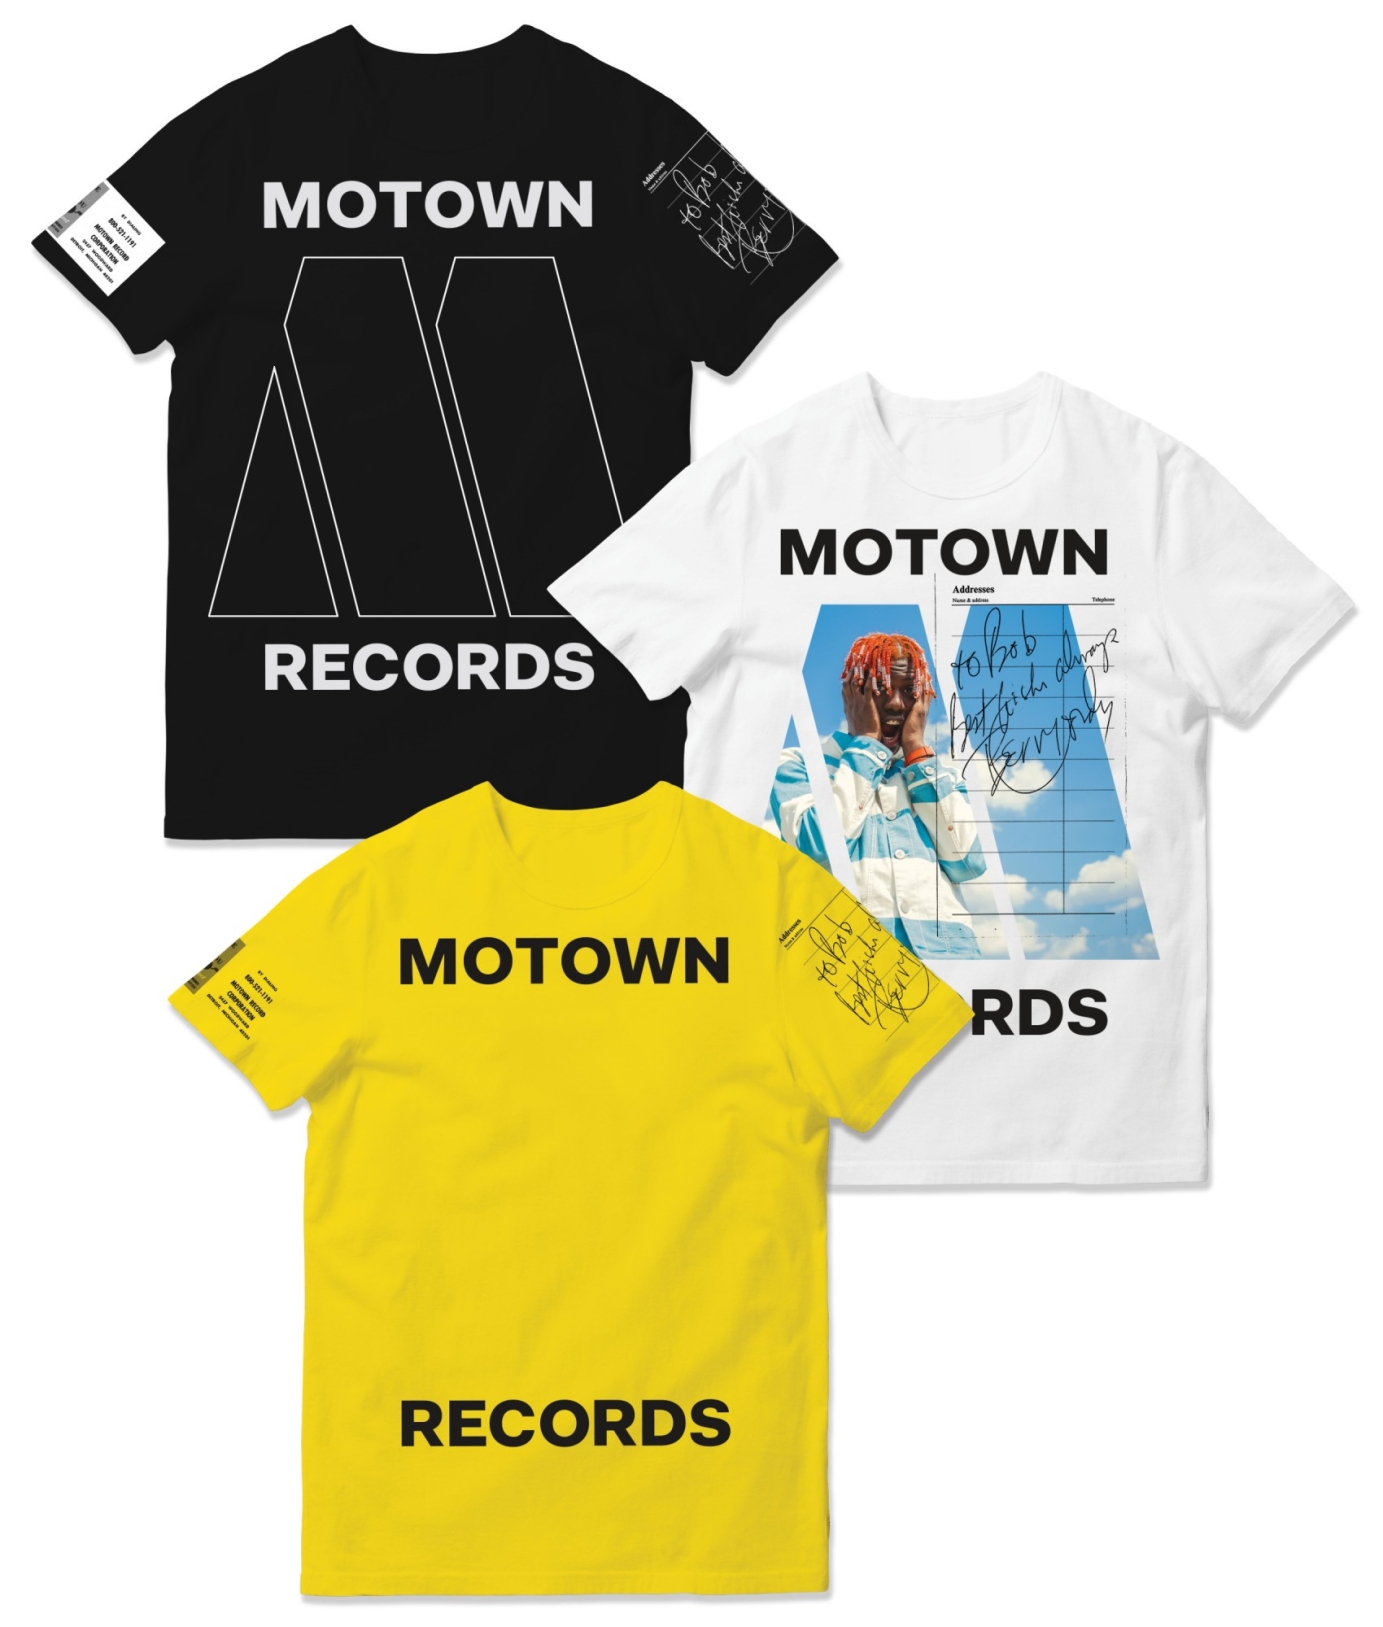 60 YEARS OF MOTOWN RECORDS — 001